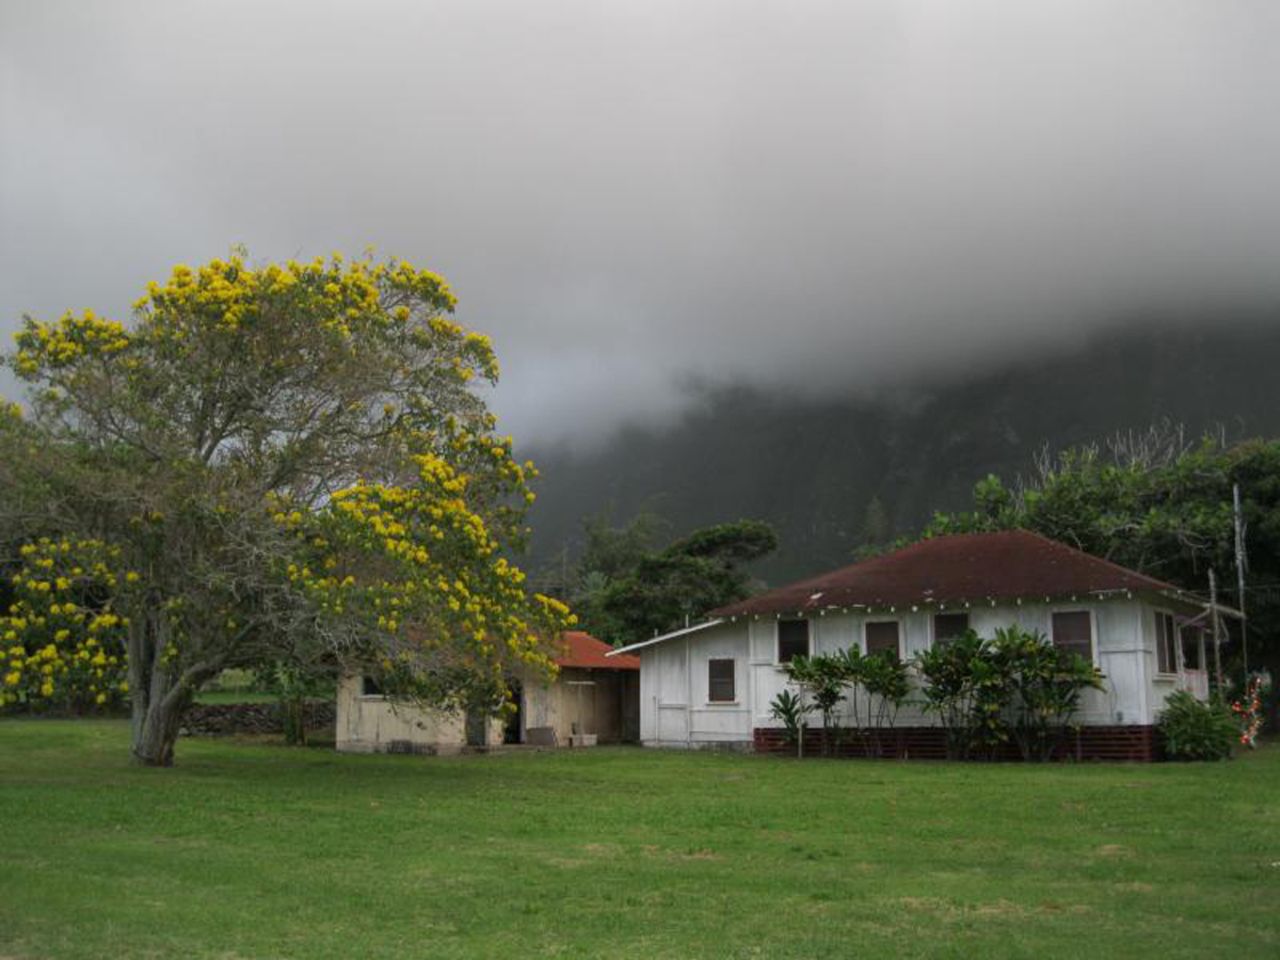 Many Kalaupapa residents lived in individual cottages, with gardens. Children and less healthy adults generally lived in communal homes.